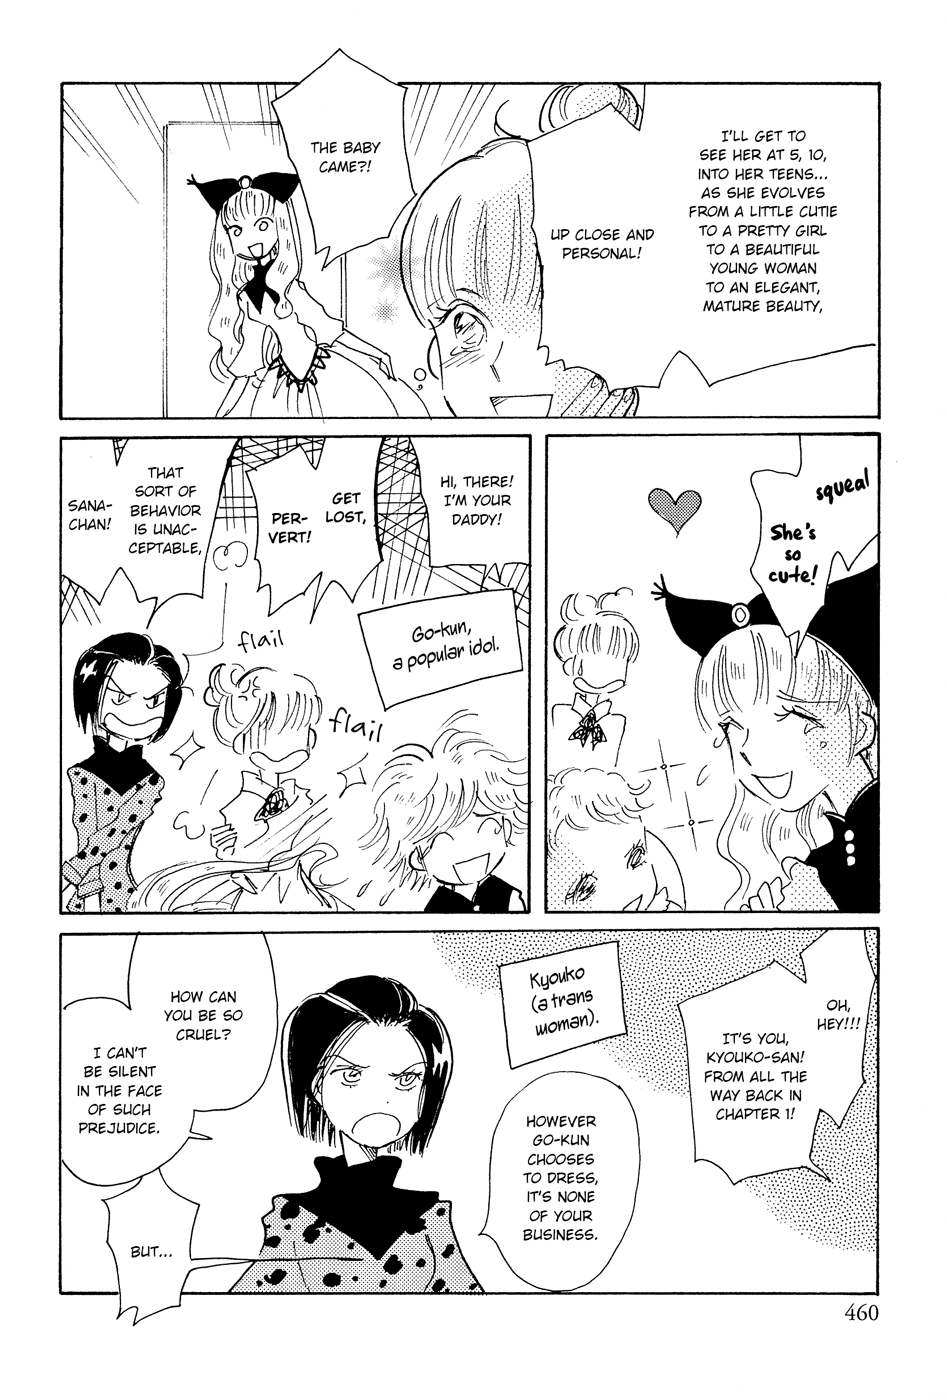 Pink Rush - Page 3